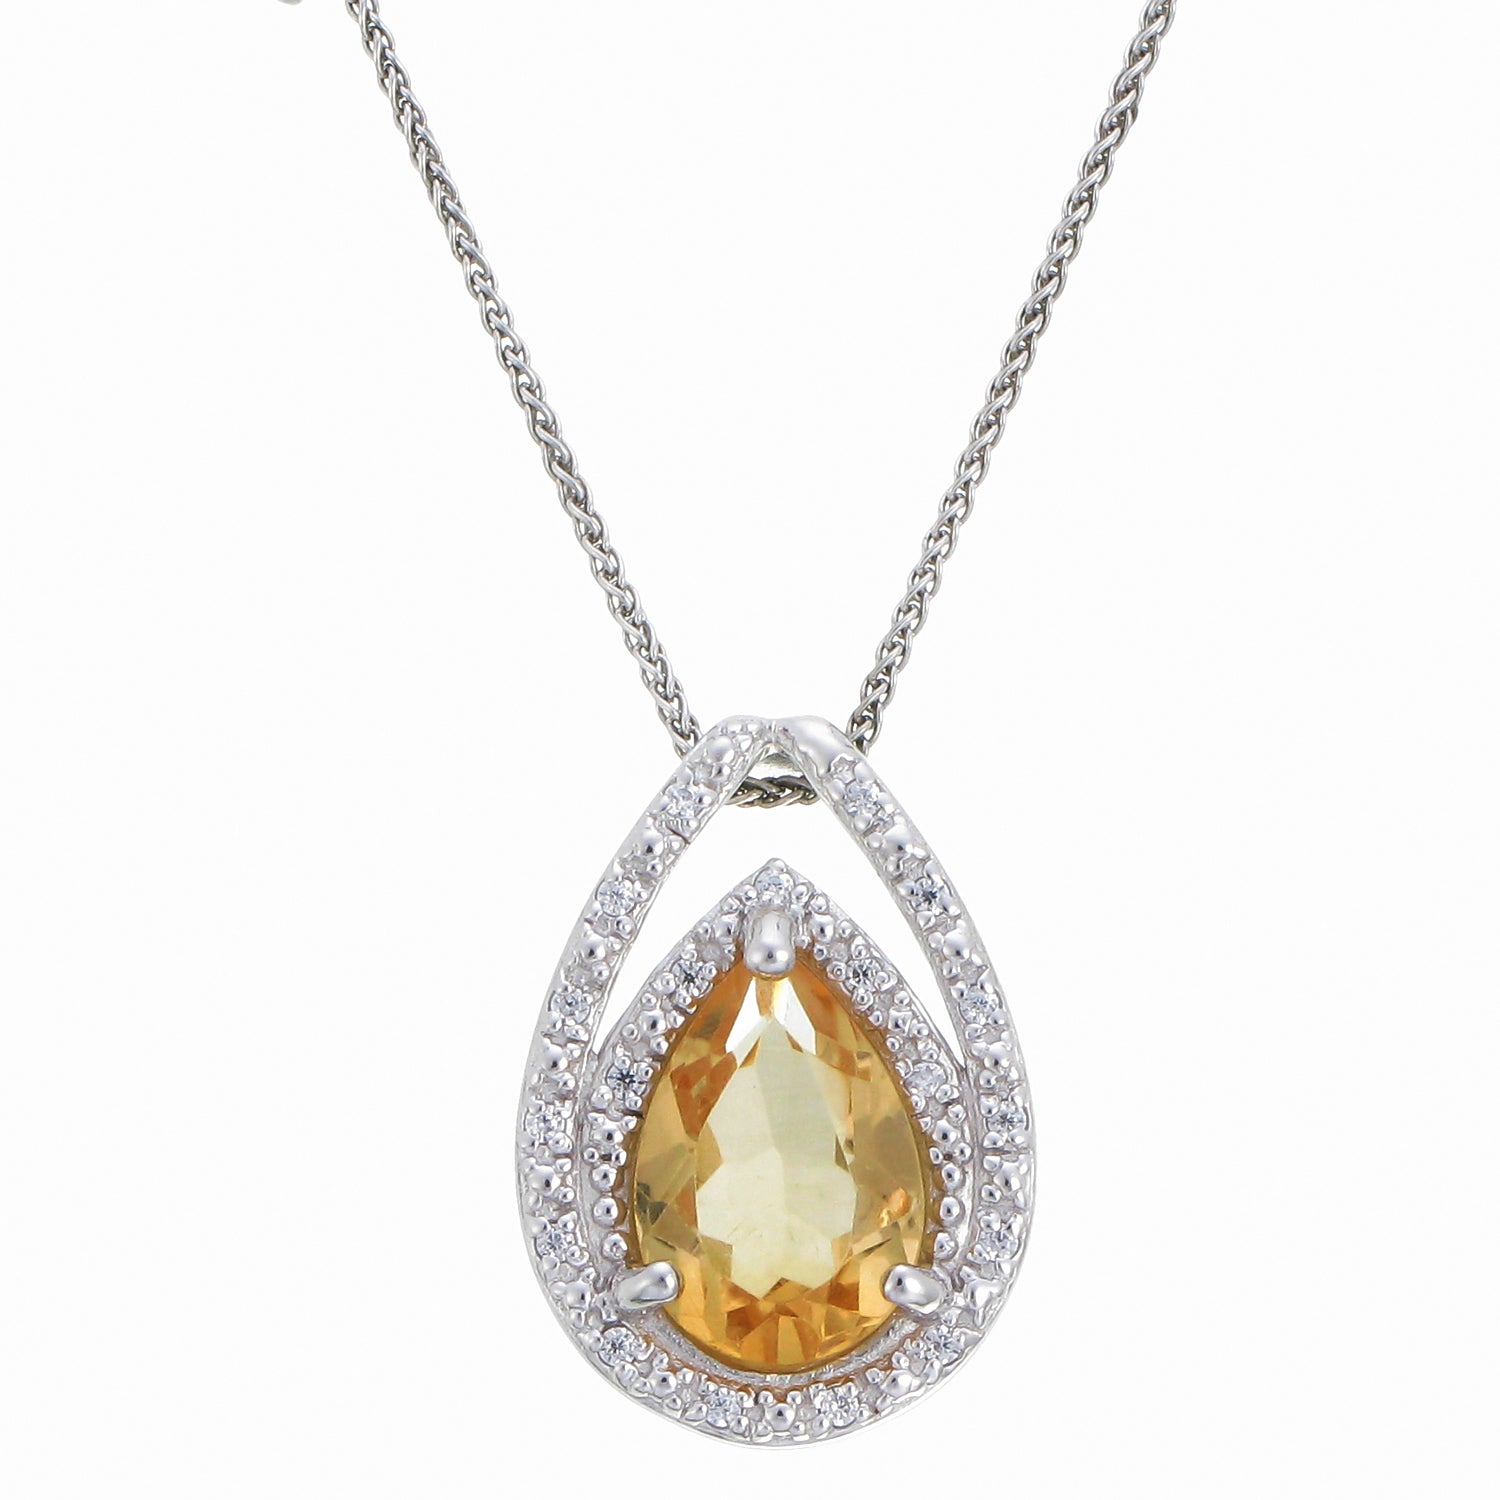 2 cttw Citrine Pendant Necklace .925 Sterling Silver With Rhodium 12x8 MM Pear